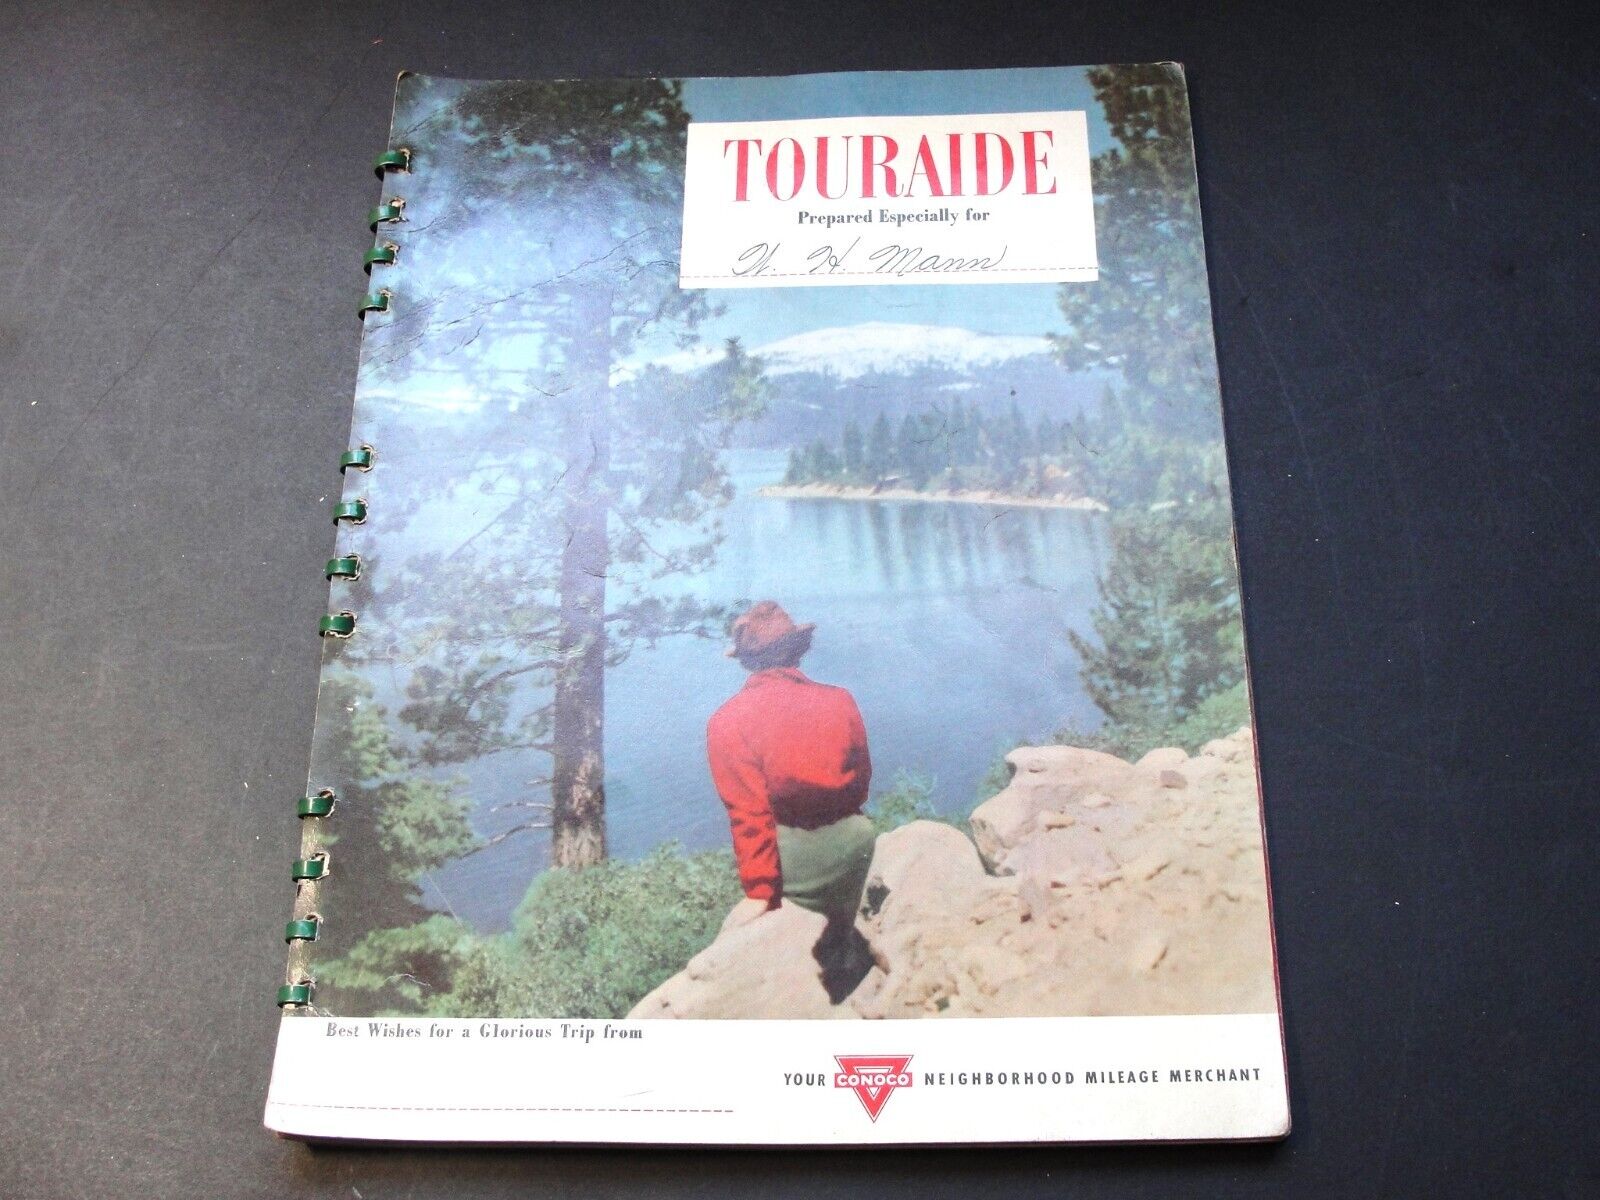 Conoco Oil Co.-Gas/Oil Ads-Touraide Travel Guide Maps-1948 Spiral Bound Booklet.